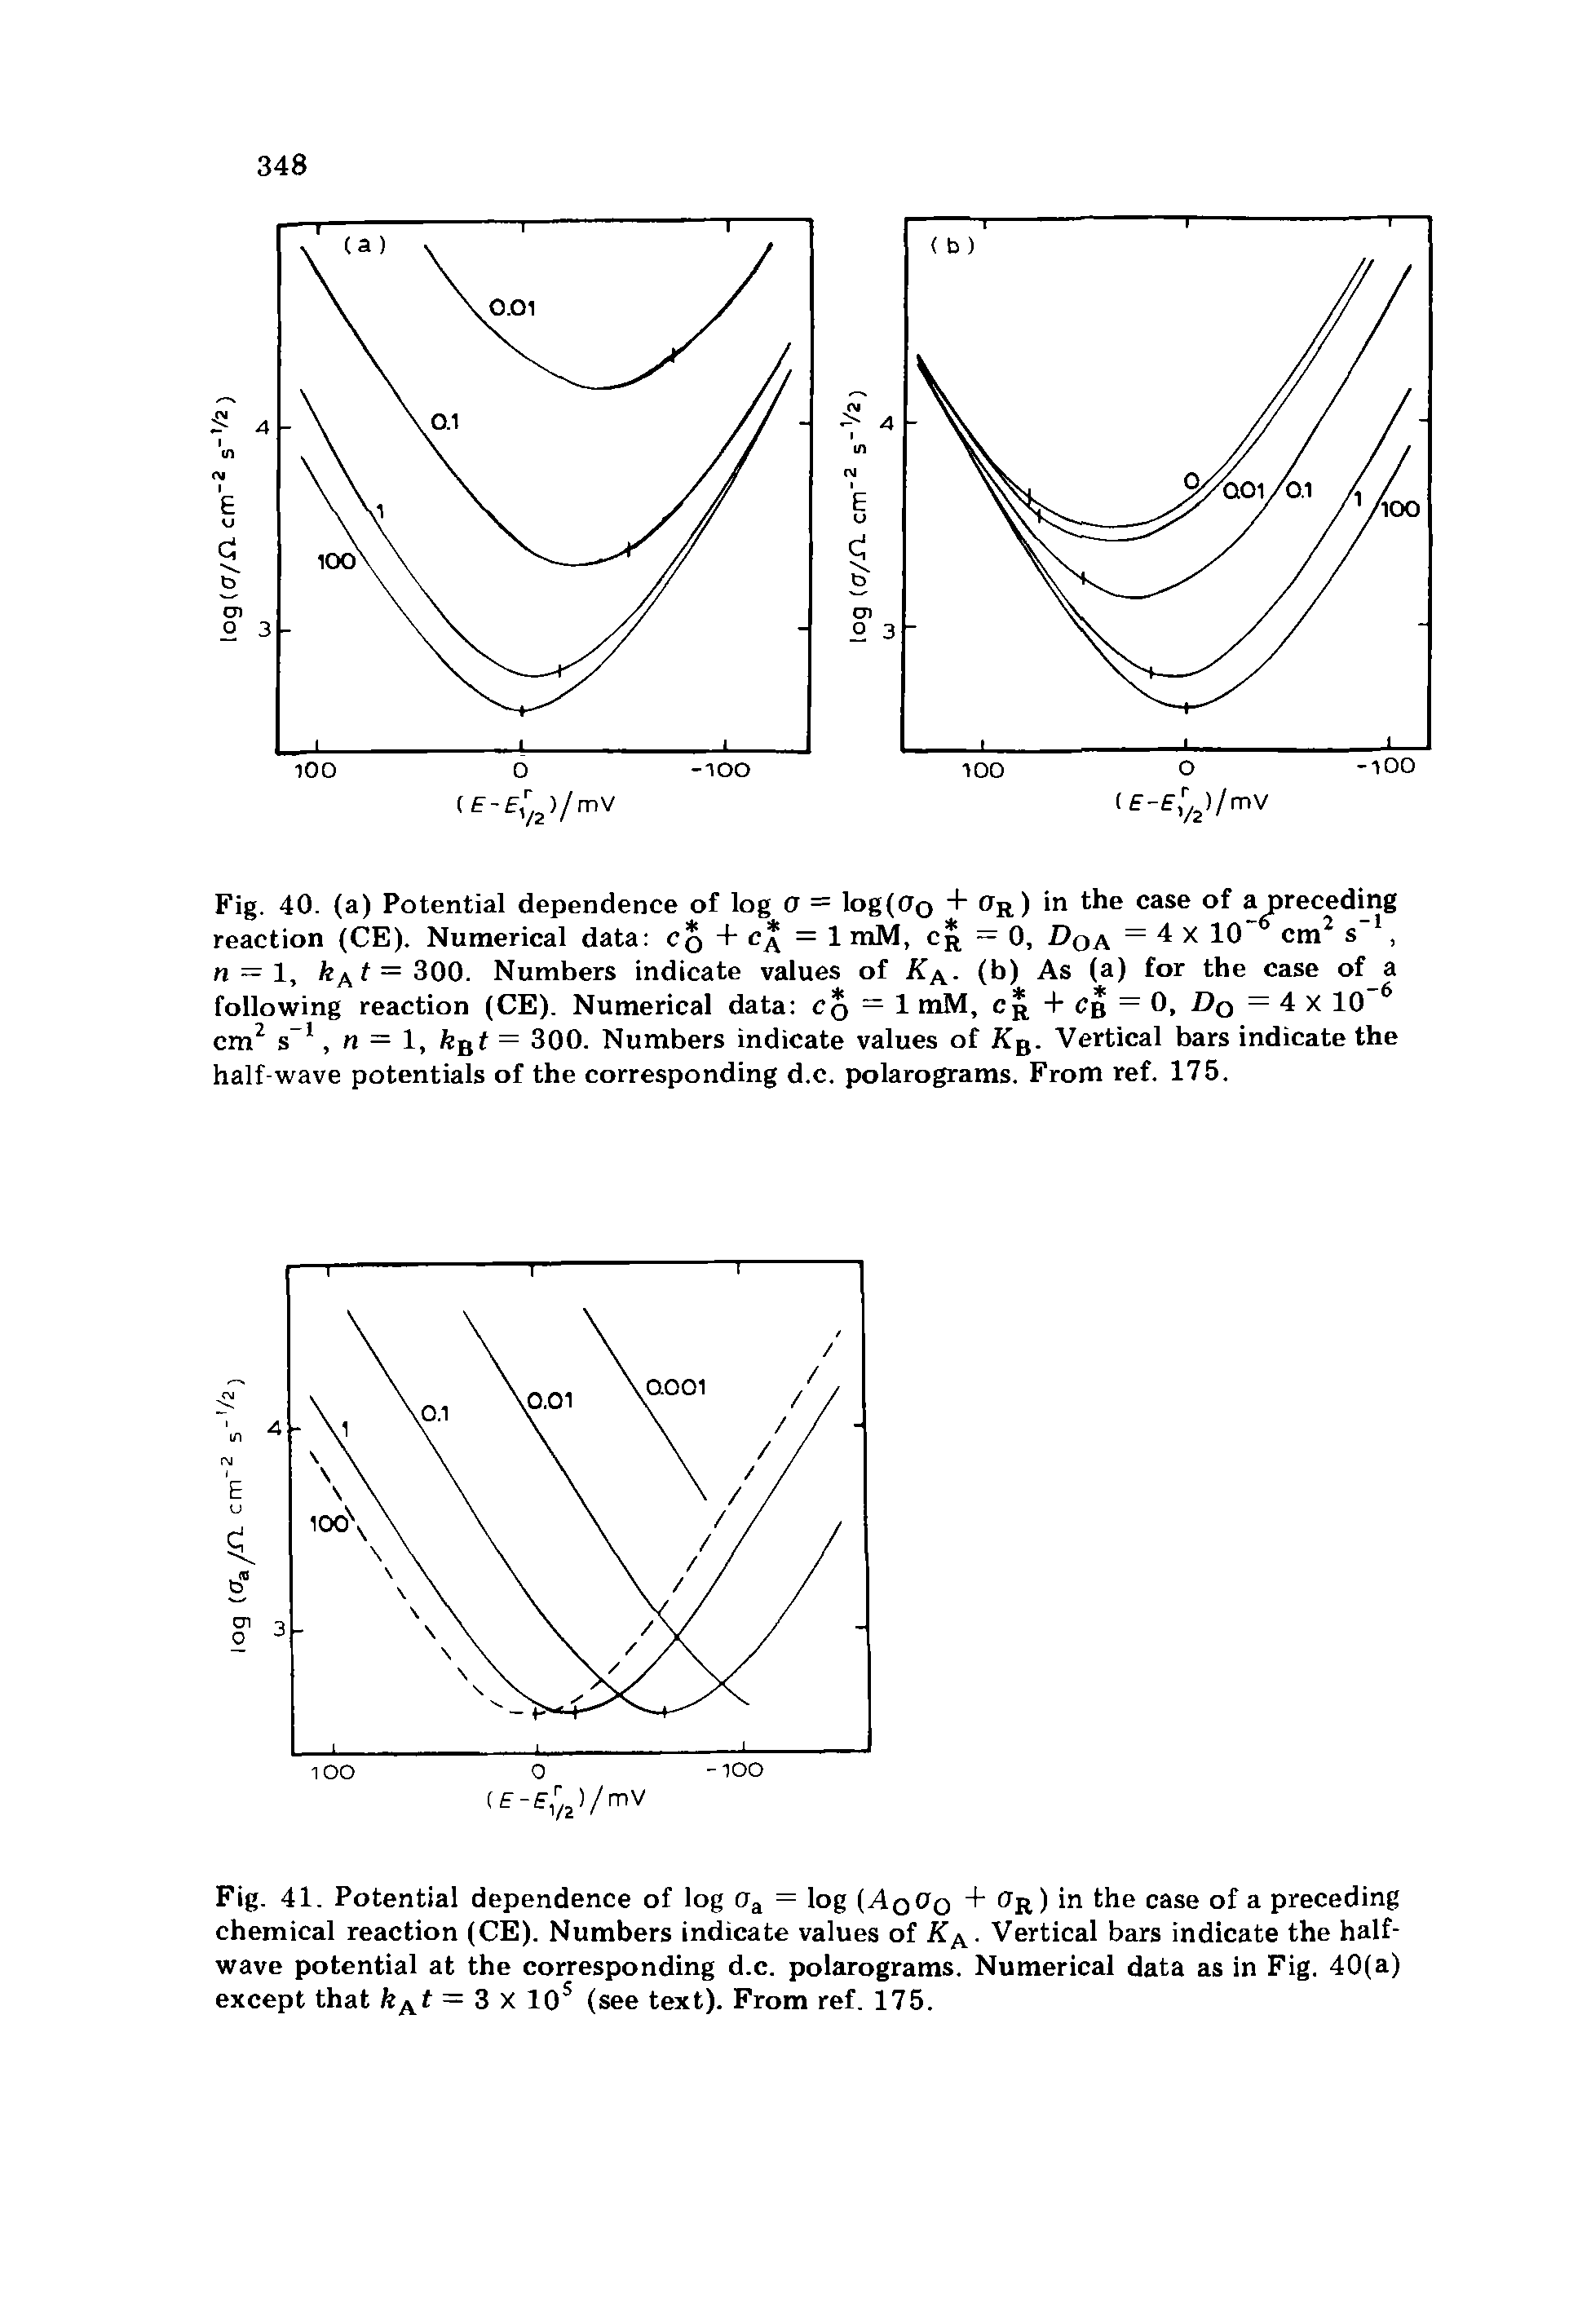 Fig. 41. Potential dependence of log aa = log (Ao o + (JR) in the case of a preceding chemical reaction (CE). Numbers indicate values of KA. Vertical bars indicate the halfwave potential at the corresponding d.c. polarograms. Numerical data as in Fig. 40(a) except that kAt — 3 X 10s (see text). From ref. 175.